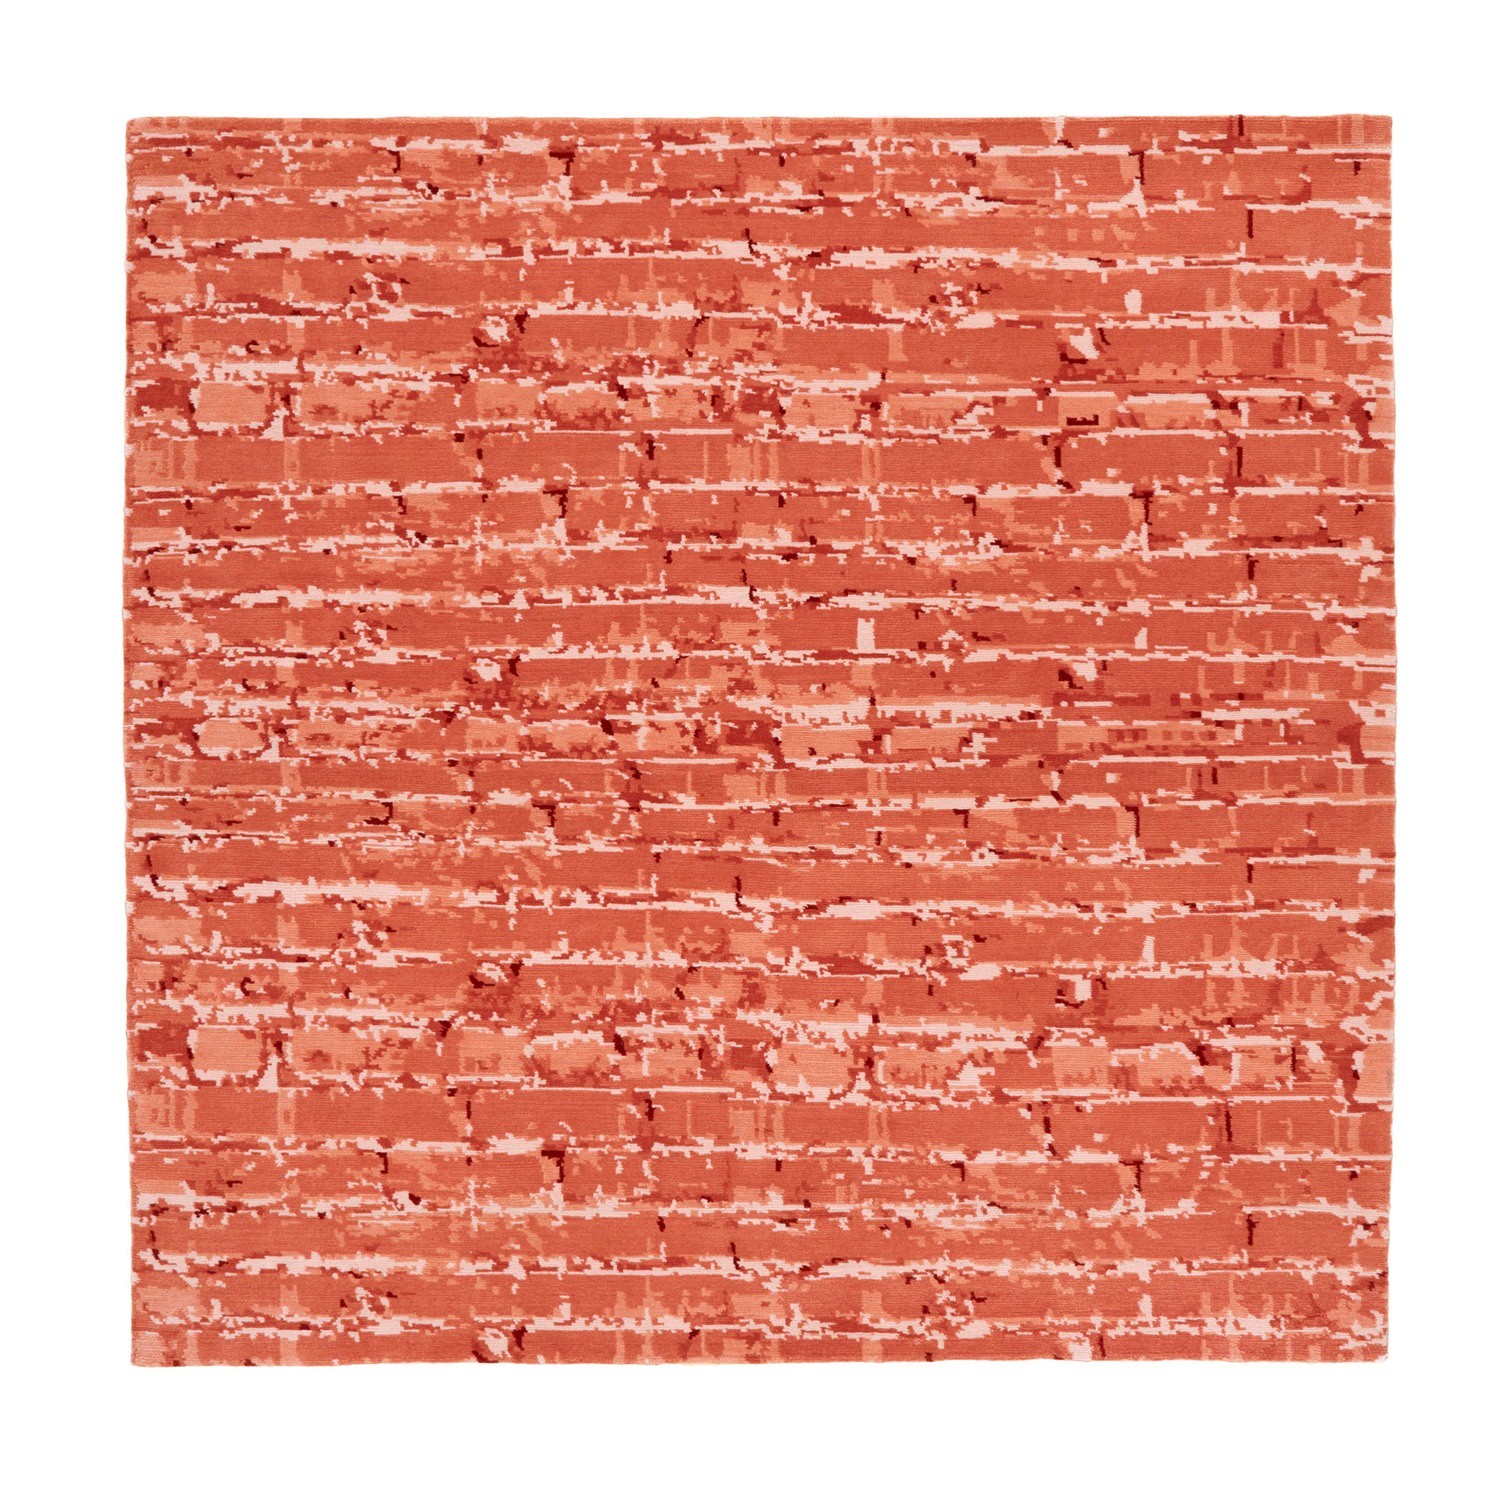 Nepalese brick wall design size 170 x 170 - Final Reduction